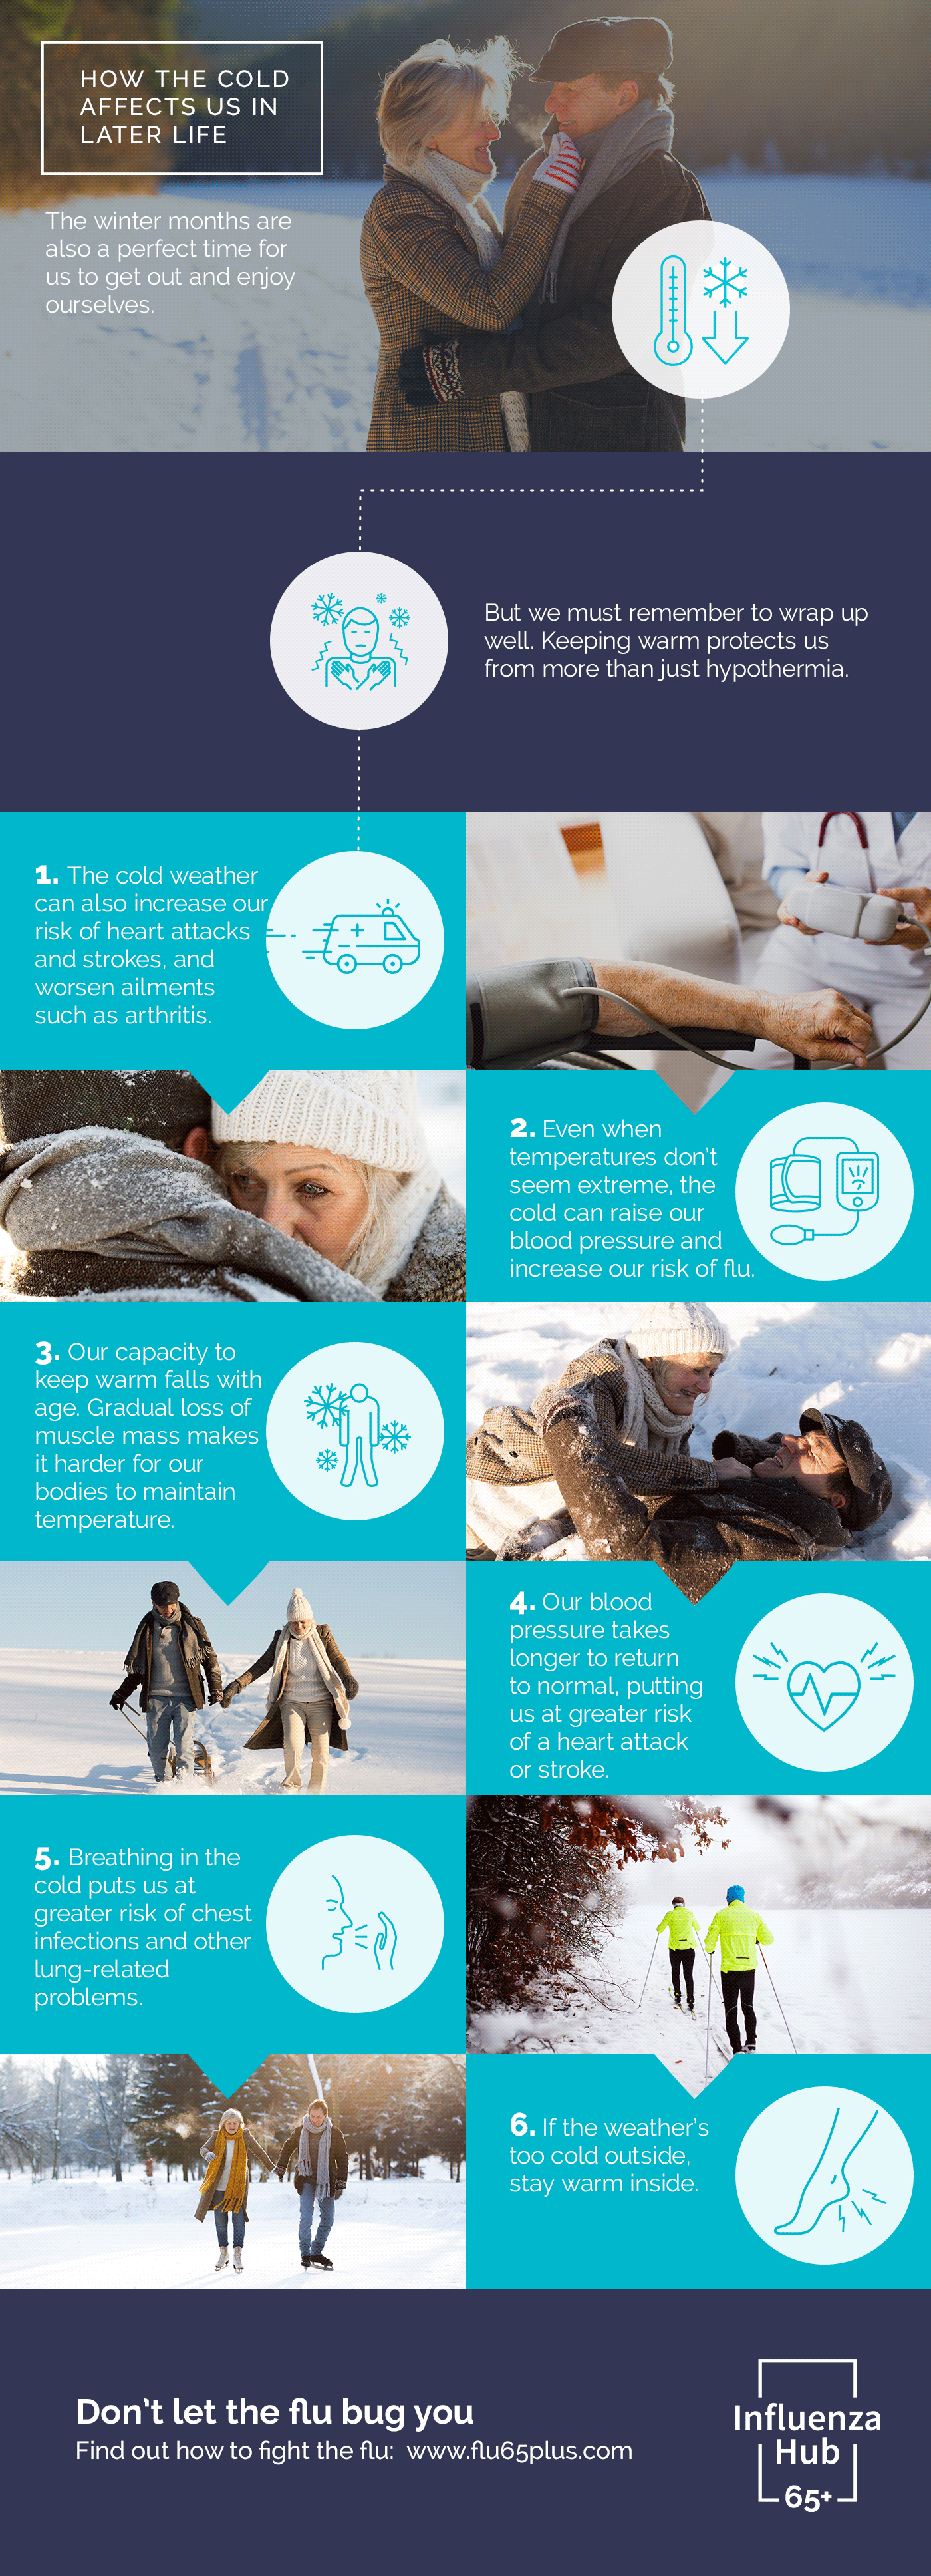 How the cold affects us in later life